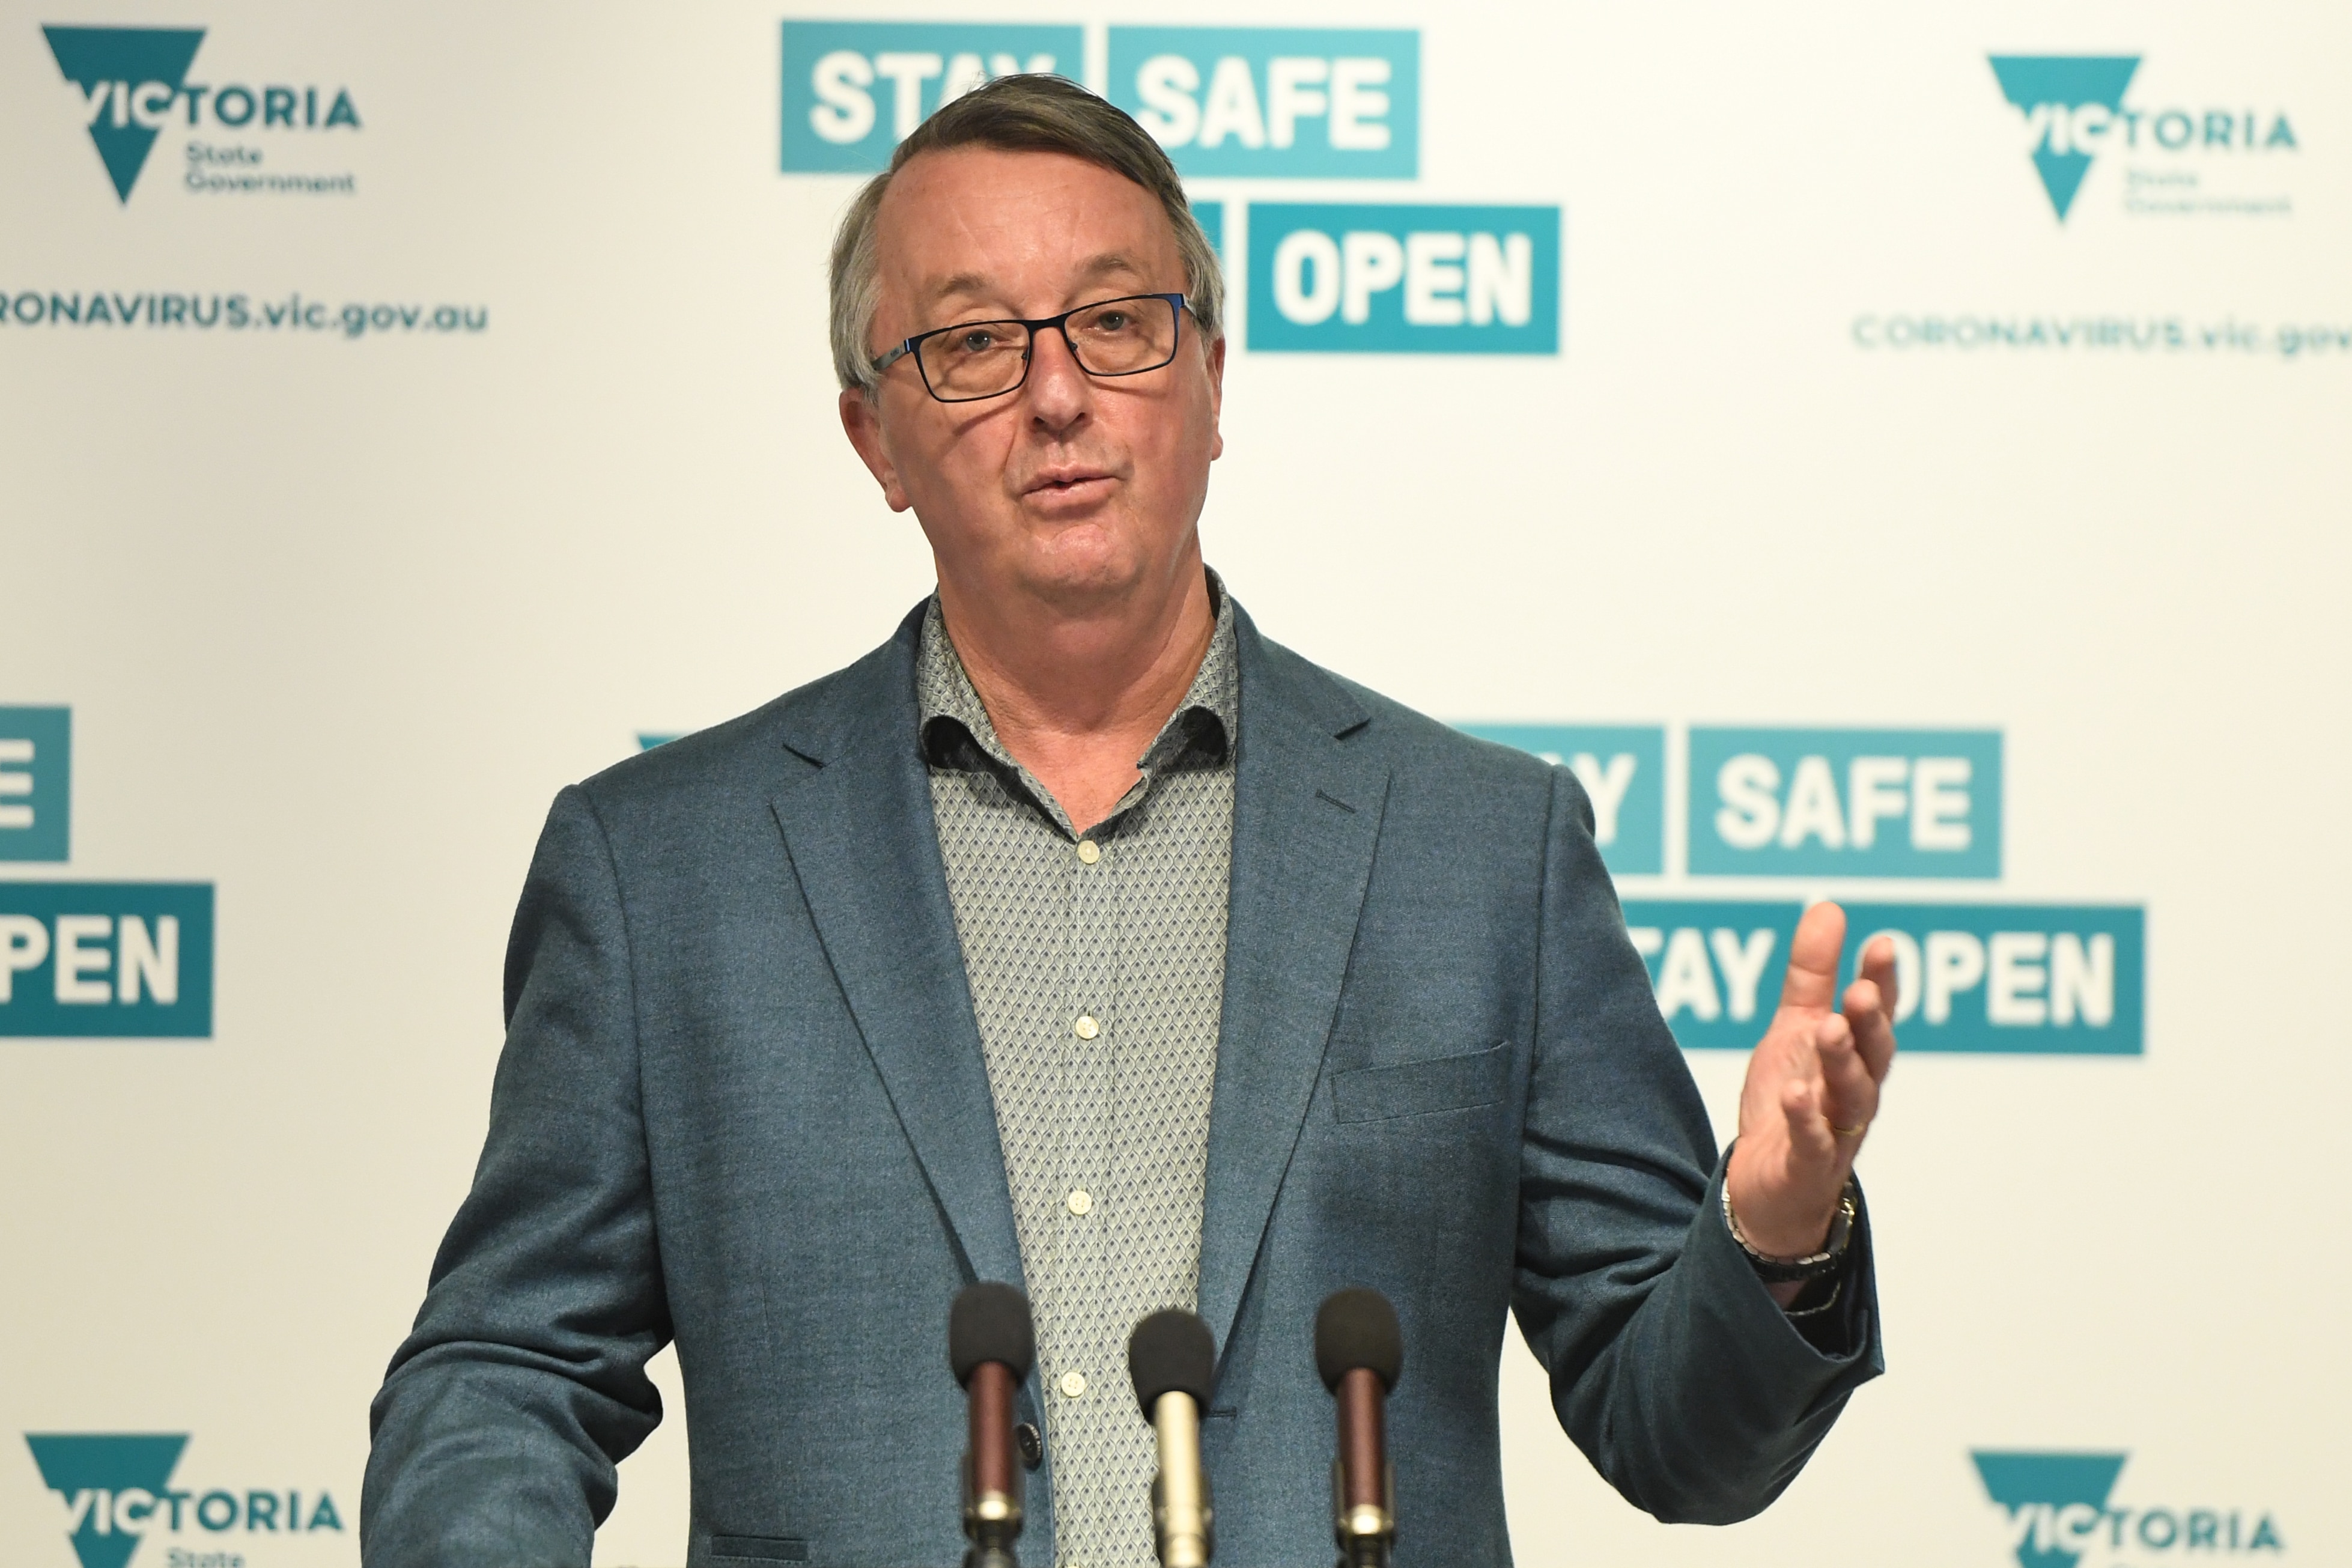 Victorian Health Minister Martin Foley addresses the media during a press conference in Melbourne, on 22 November, 2020. 